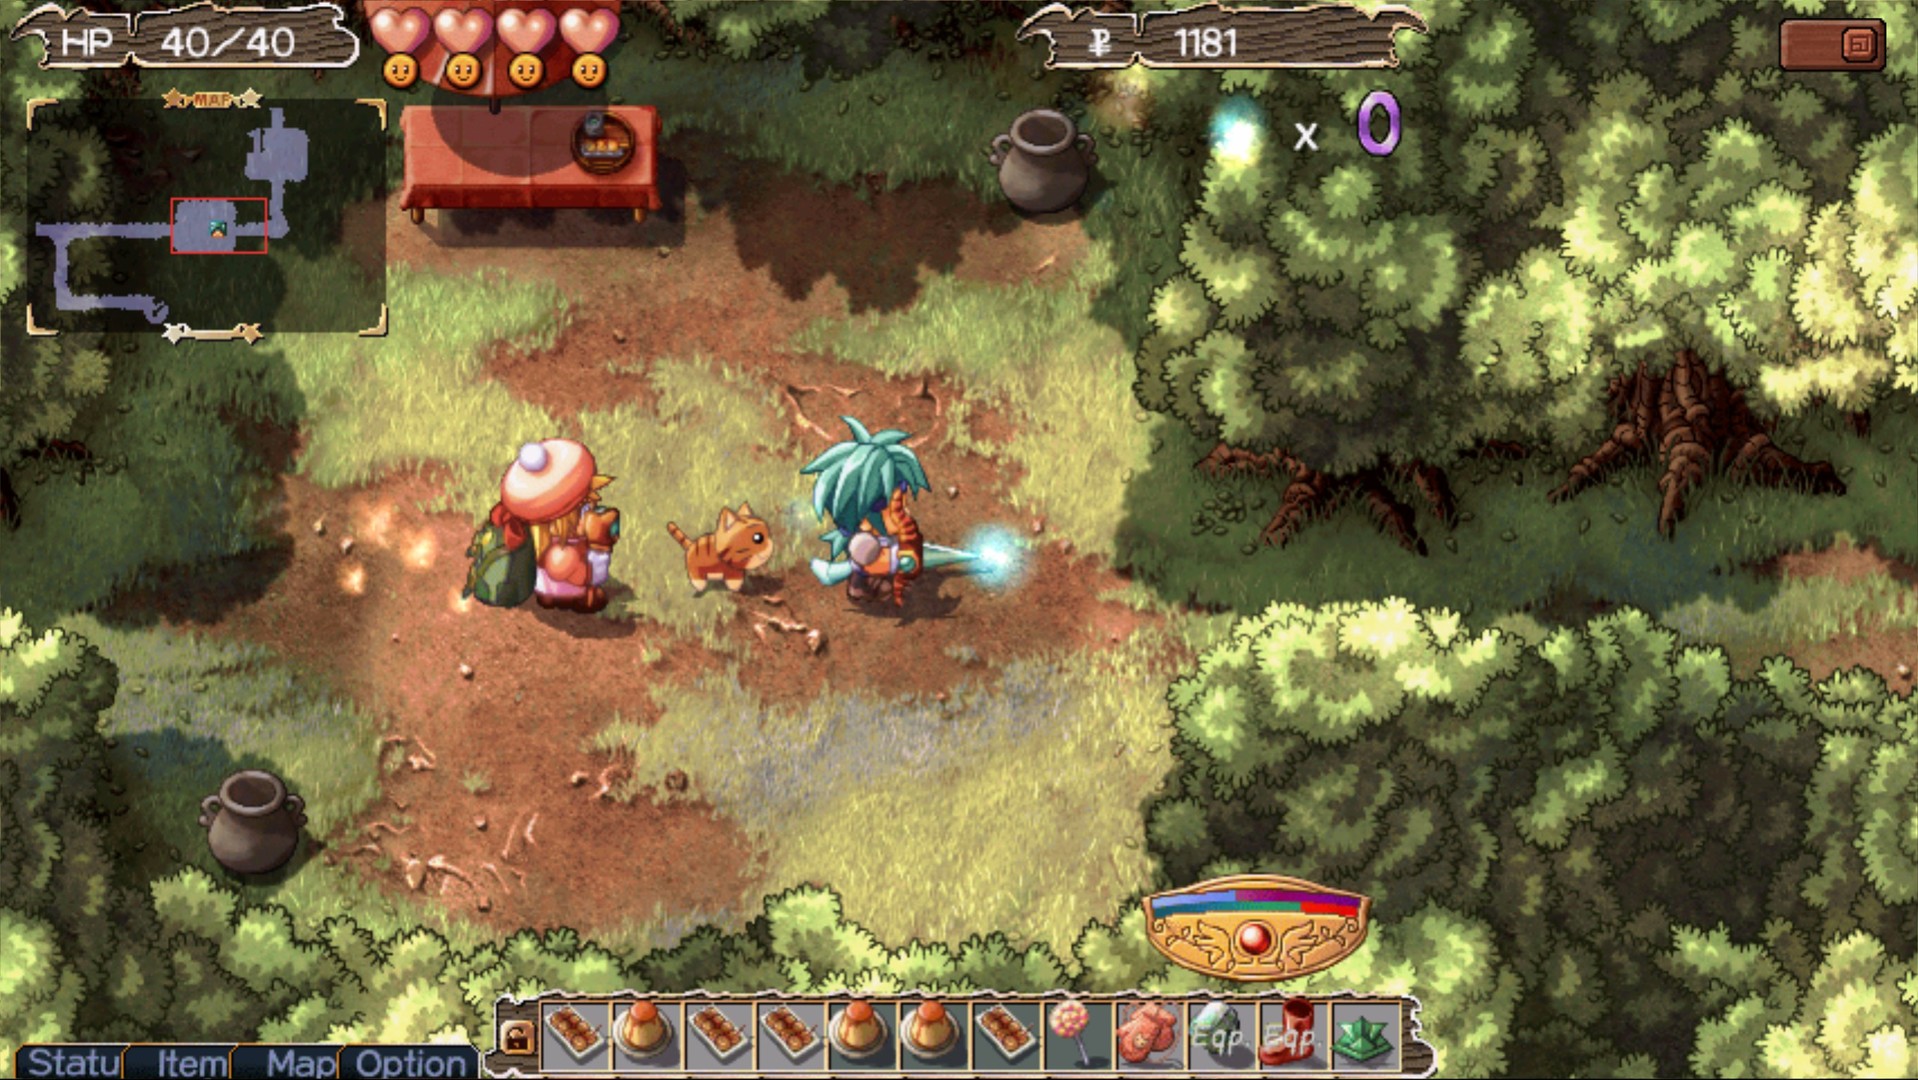 Best JRPGs - The step-sibling heroines of Zwei: The Arges Adventure explore a forest.